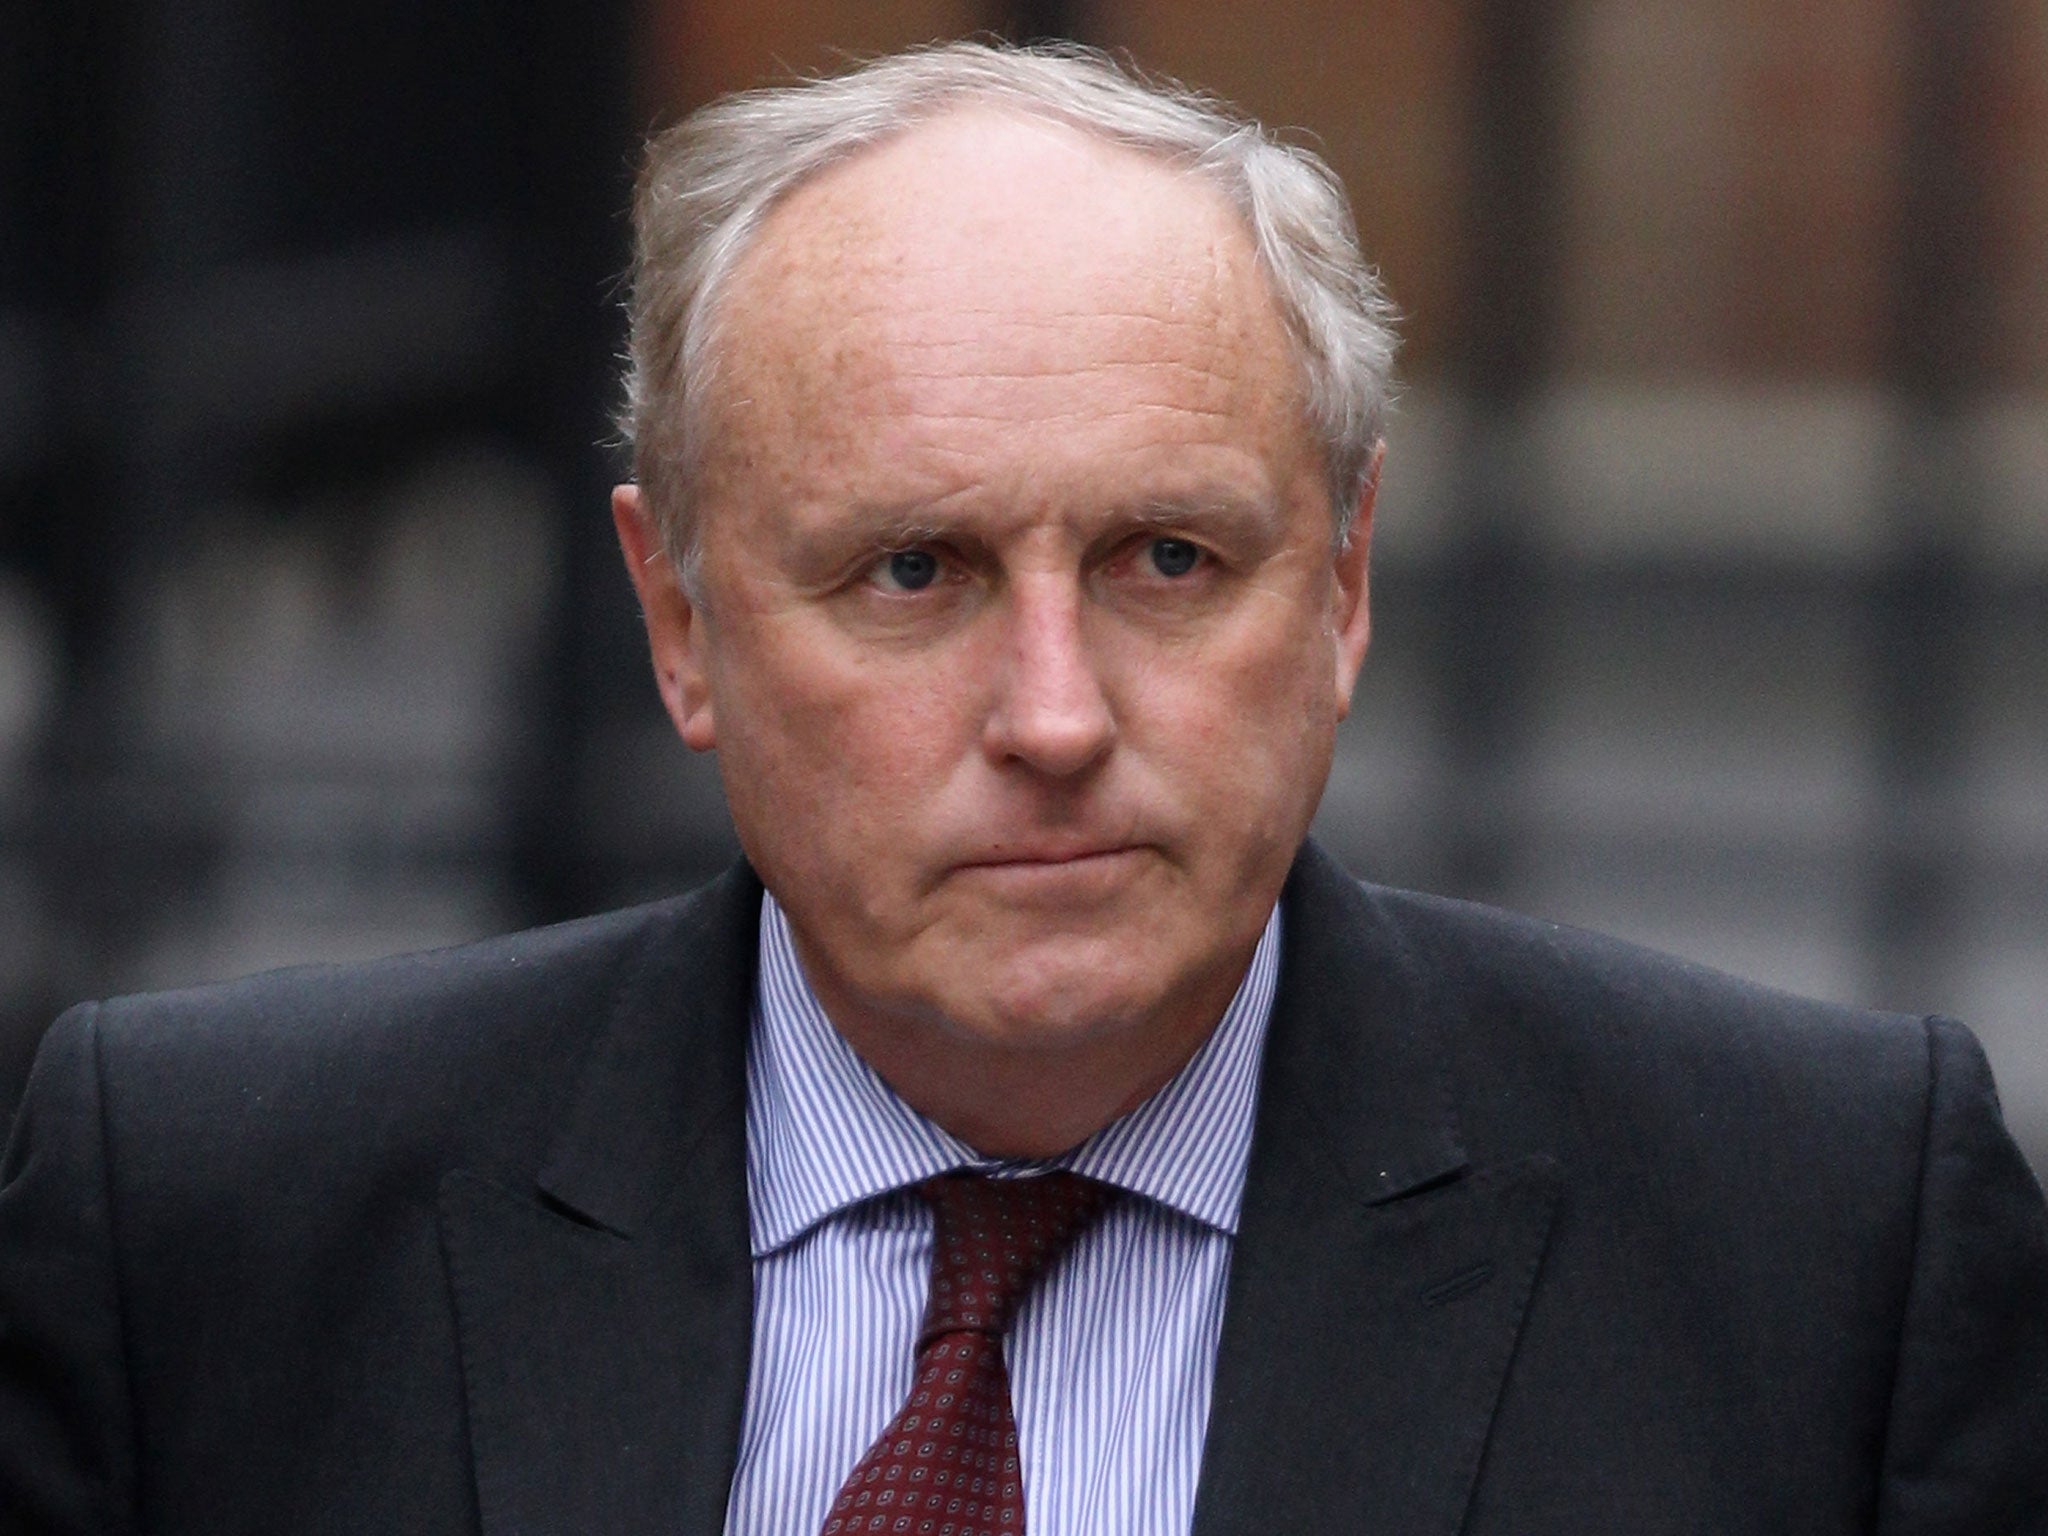 Paul Dacre is stepping down after 26 years as editor of the Daily Mail, but his influence will live on